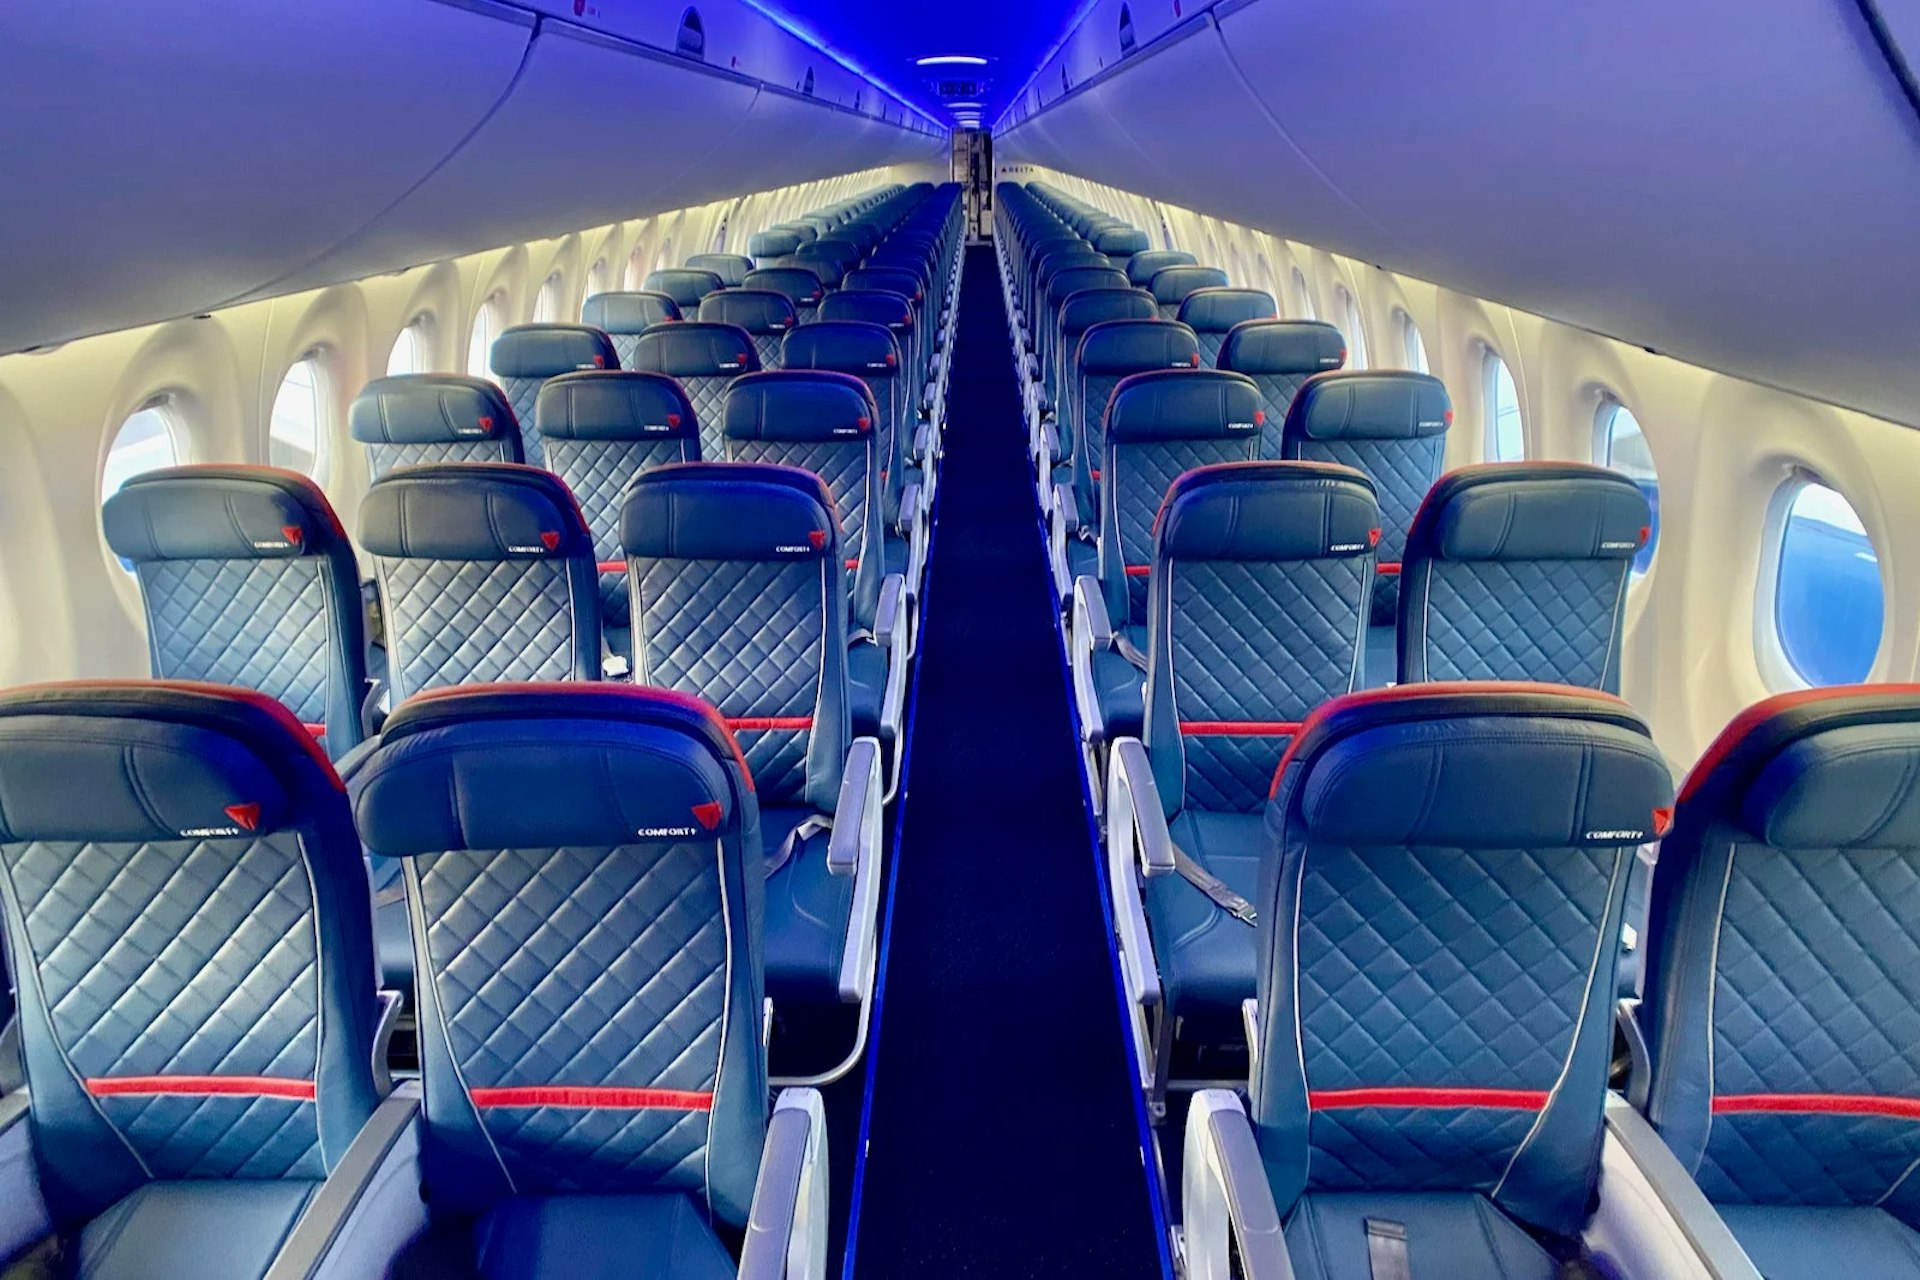 Delta's economy class on the A220-300